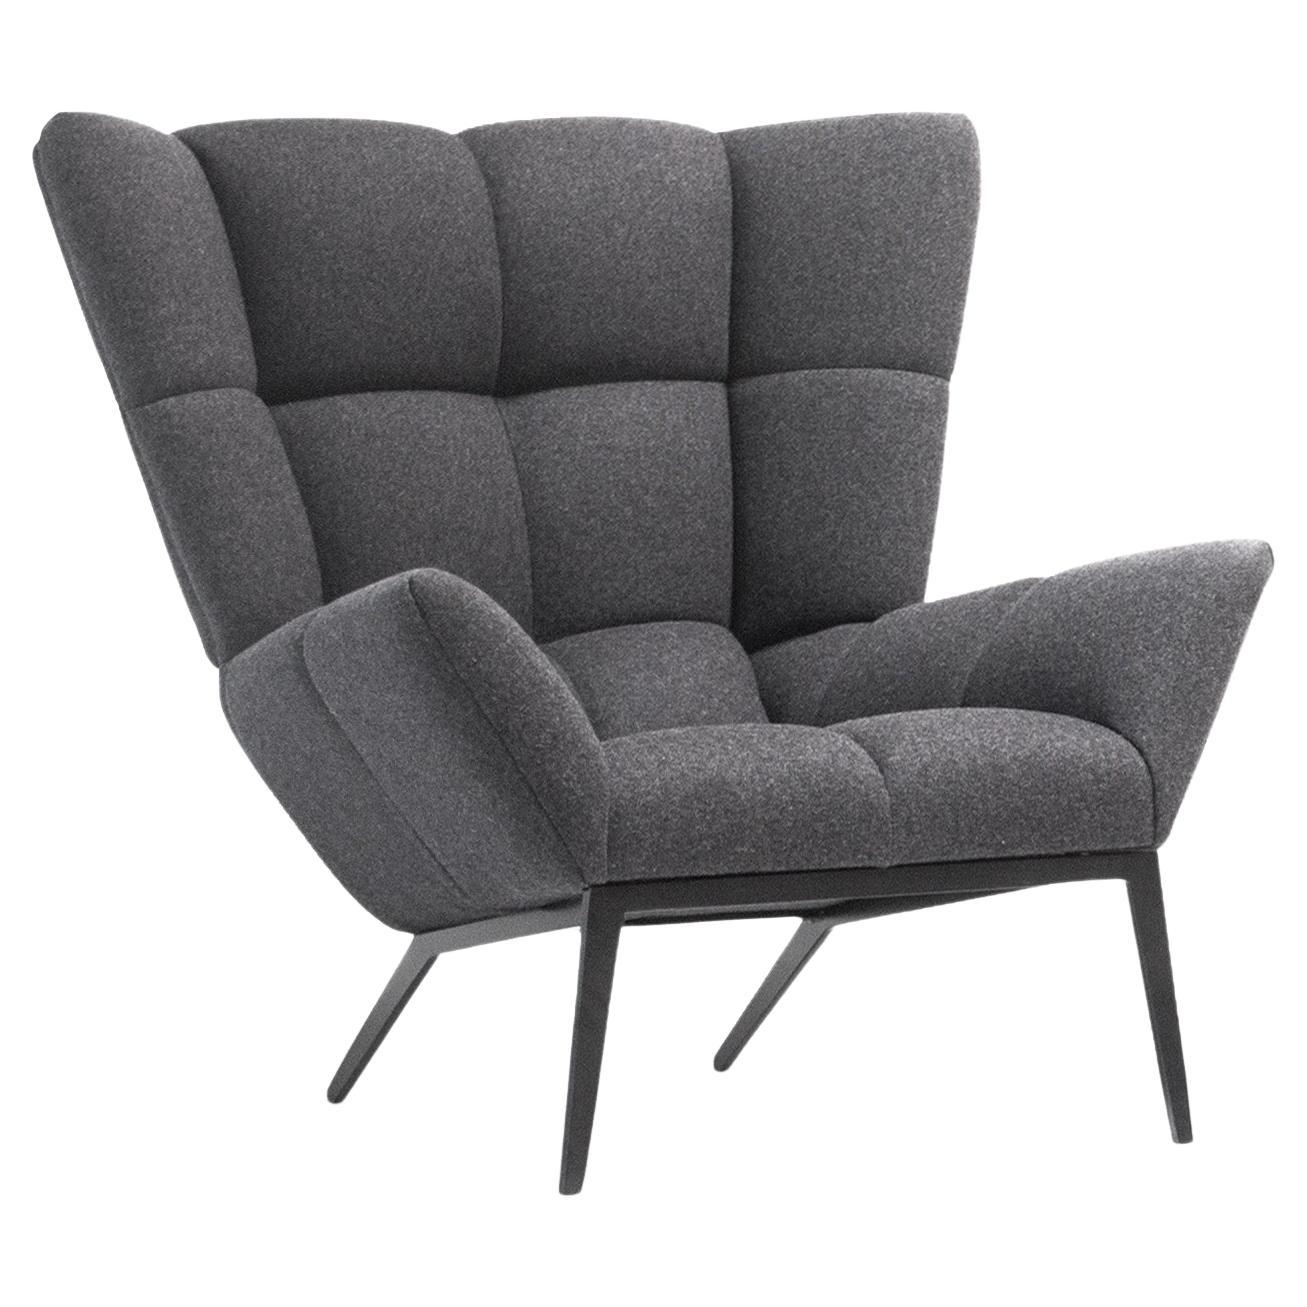 Vioski New Century Modern Tufted Tuulla Lounge Chair in Gray Felted Flannel For Sale